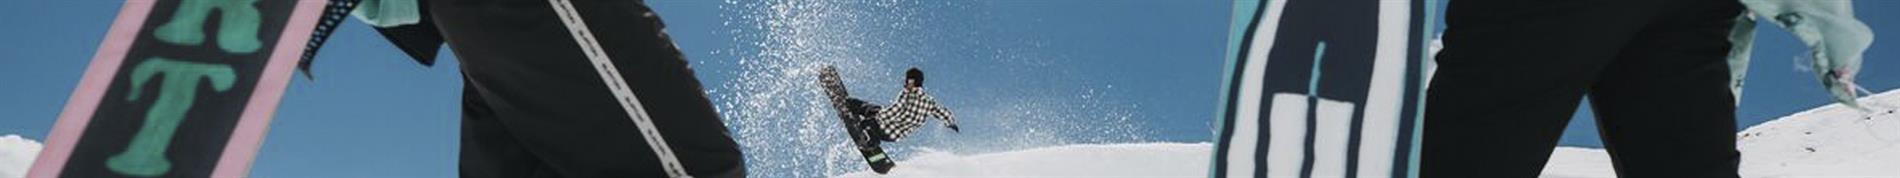 Ride Snowboards High-Performance Snowboards for Kids 